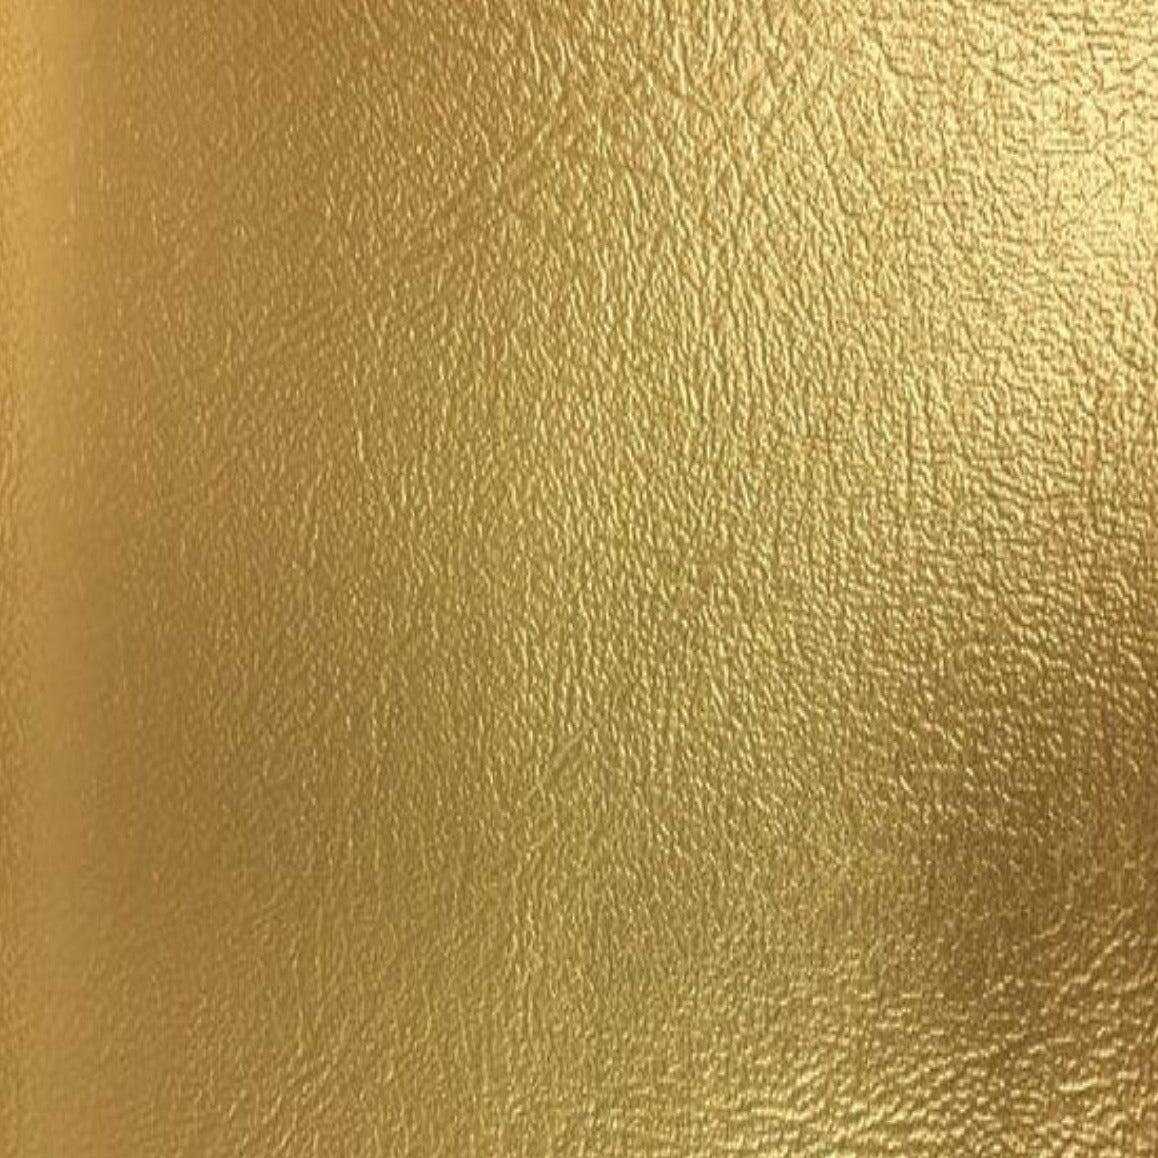 Rugged Wholesale foil pu leather For Clothing And Accessories 